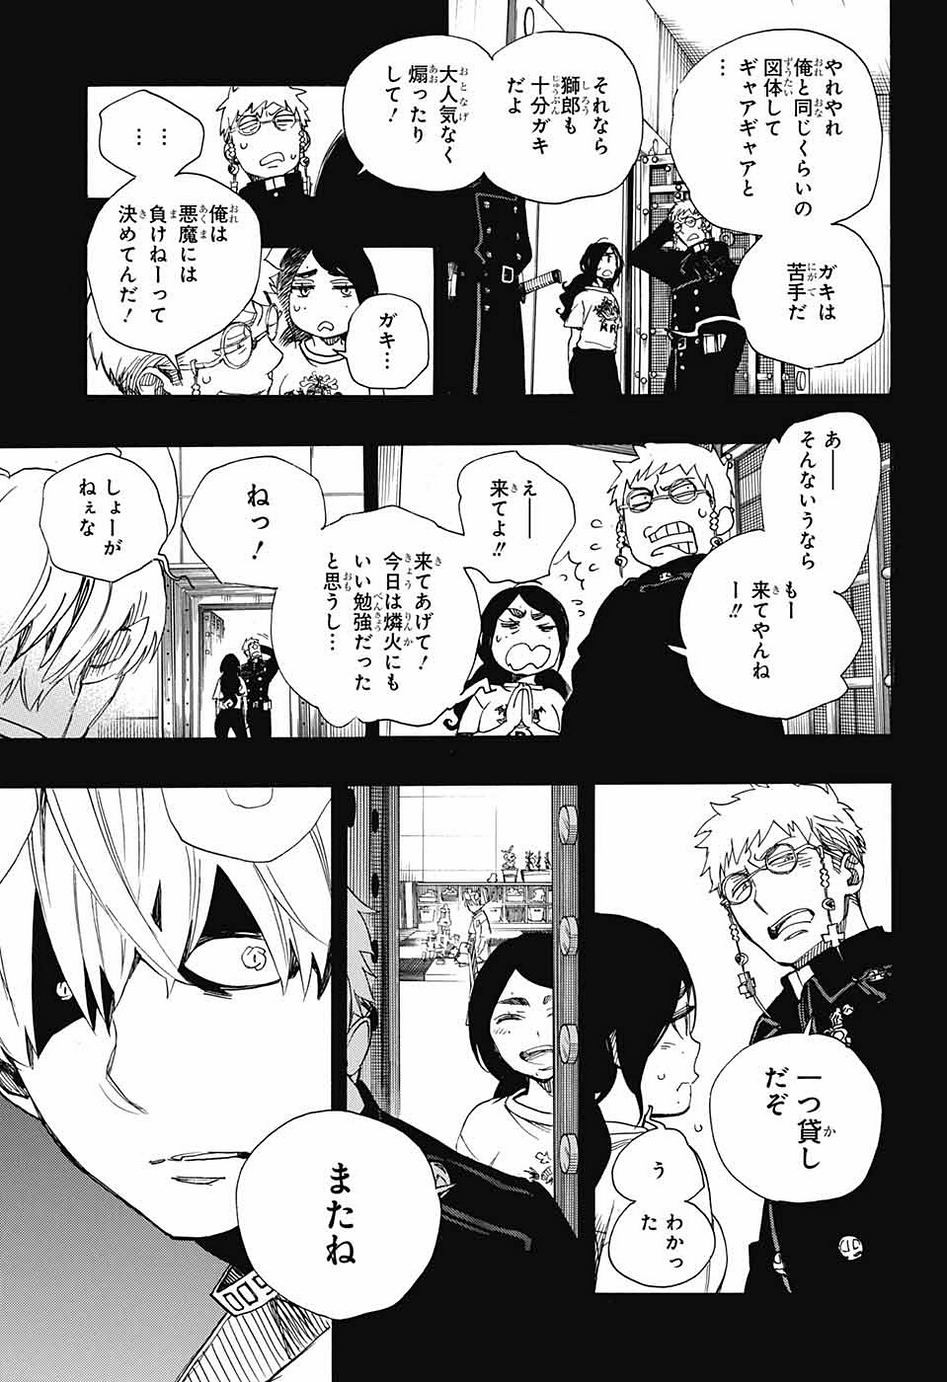 Ao no Exorcist - Chapter 105 - Page 30